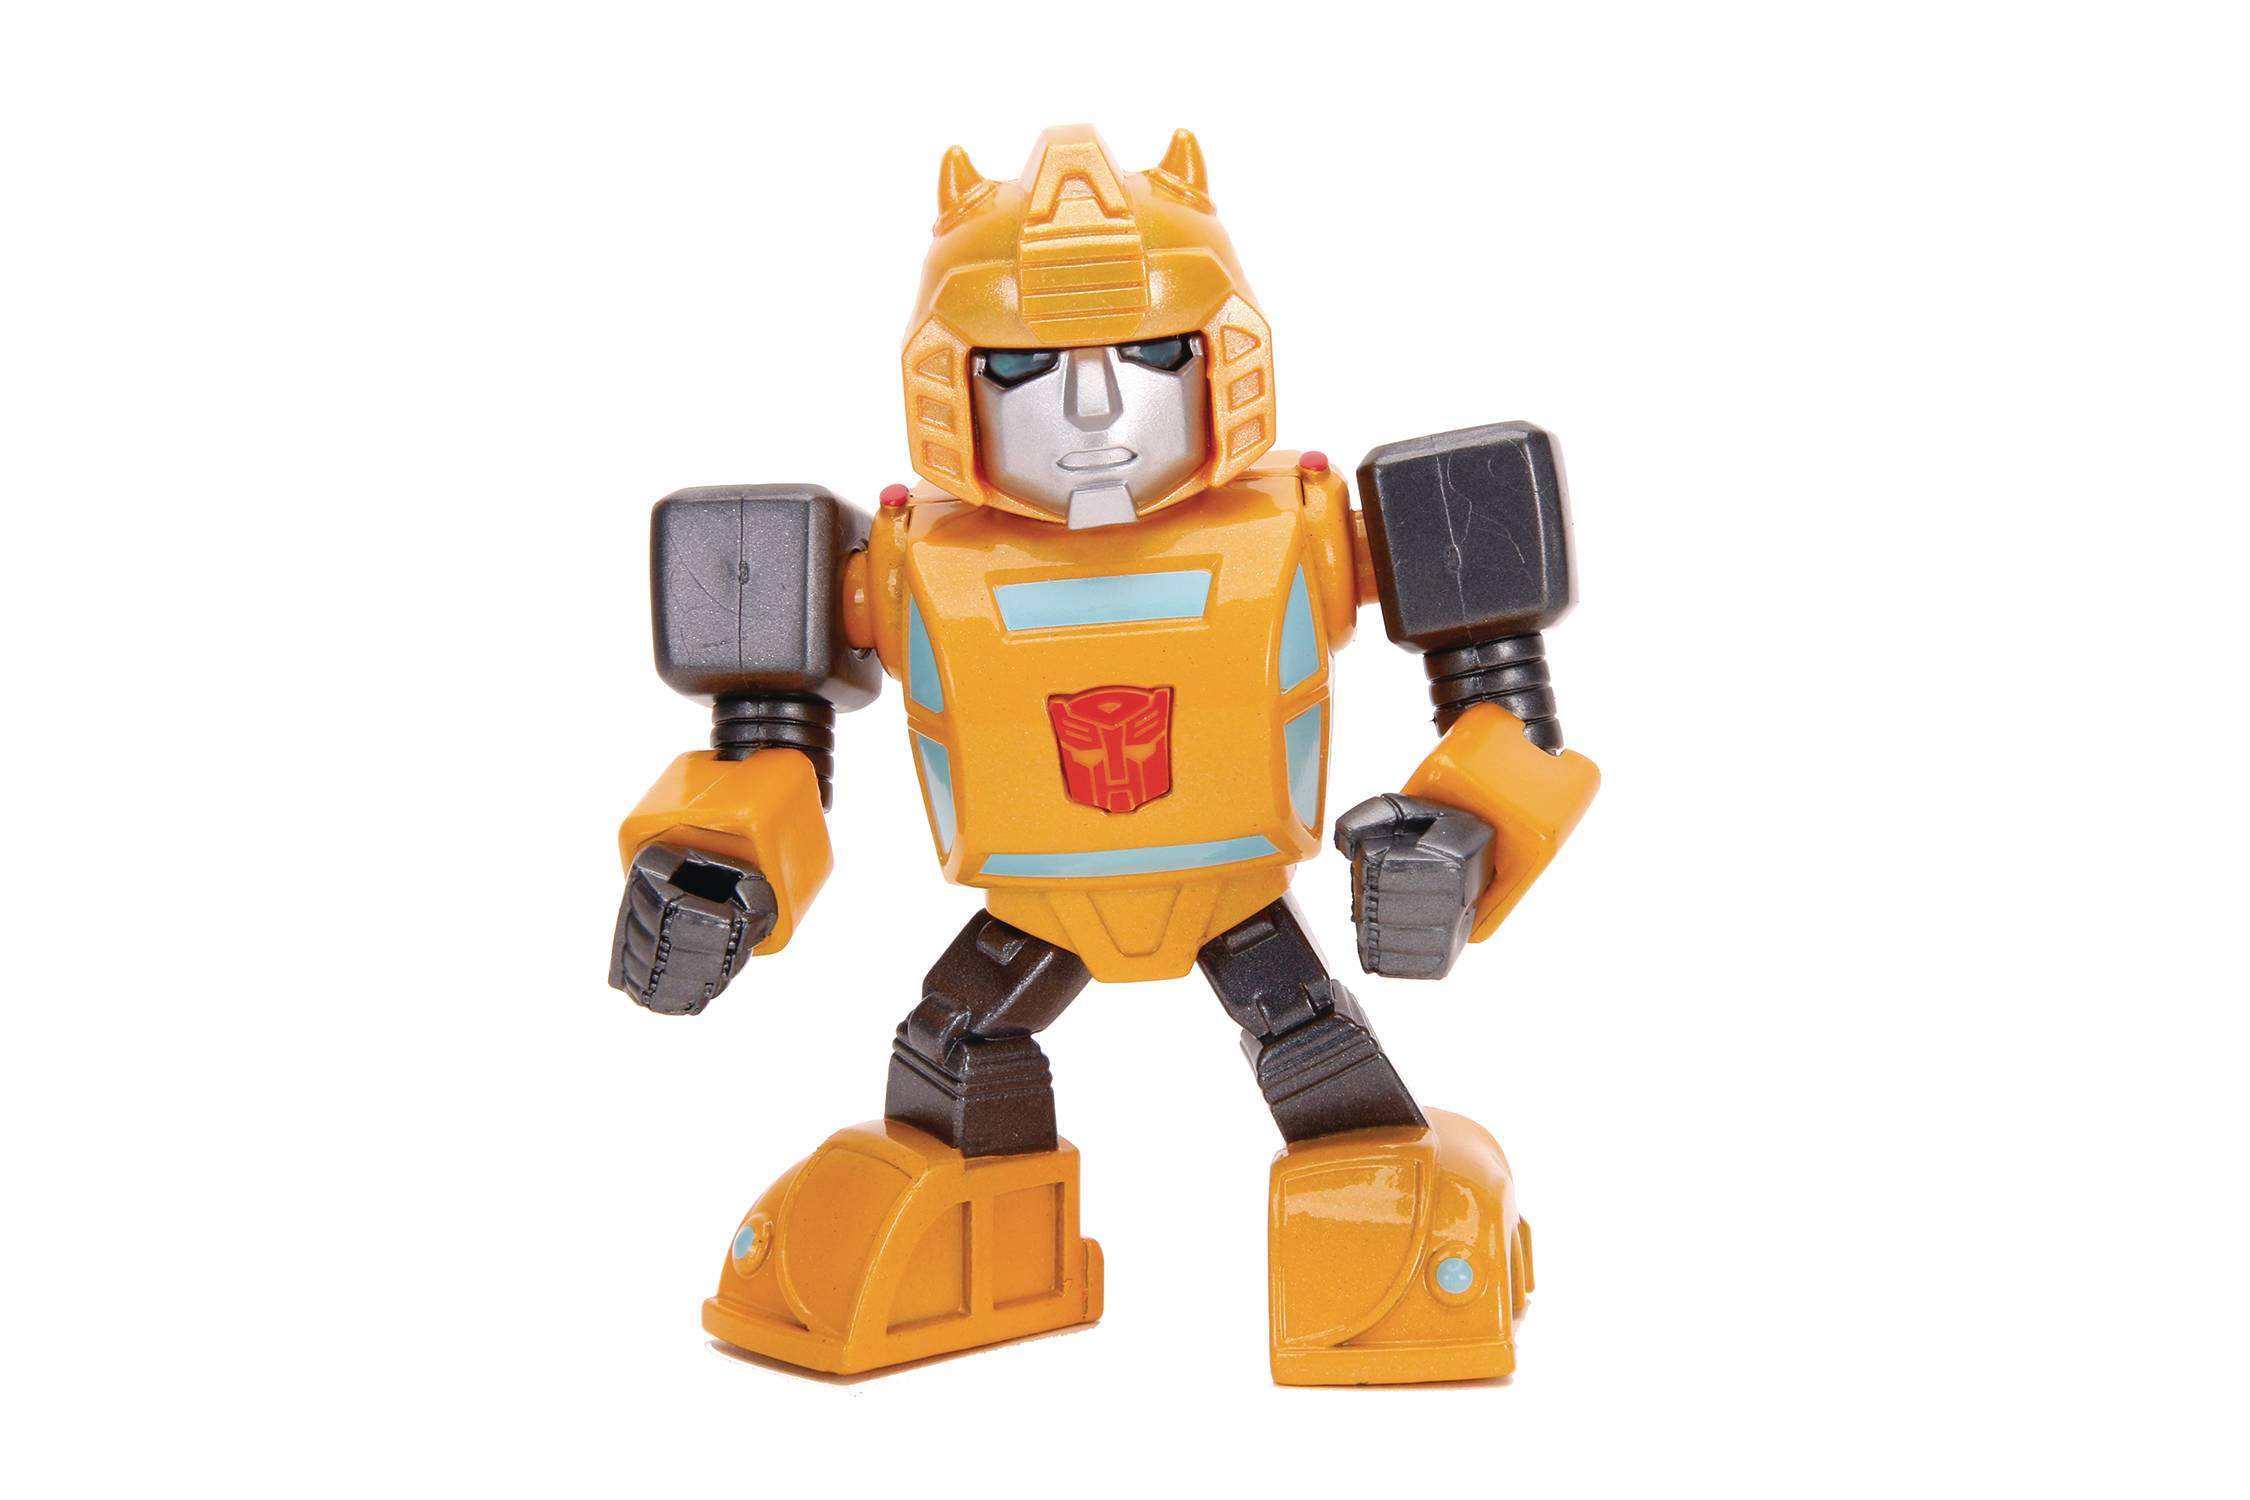 TRANSFORMERS G1 BUMBLEBEE LIGHT UP 4IN DIE-CAST FIG  (C